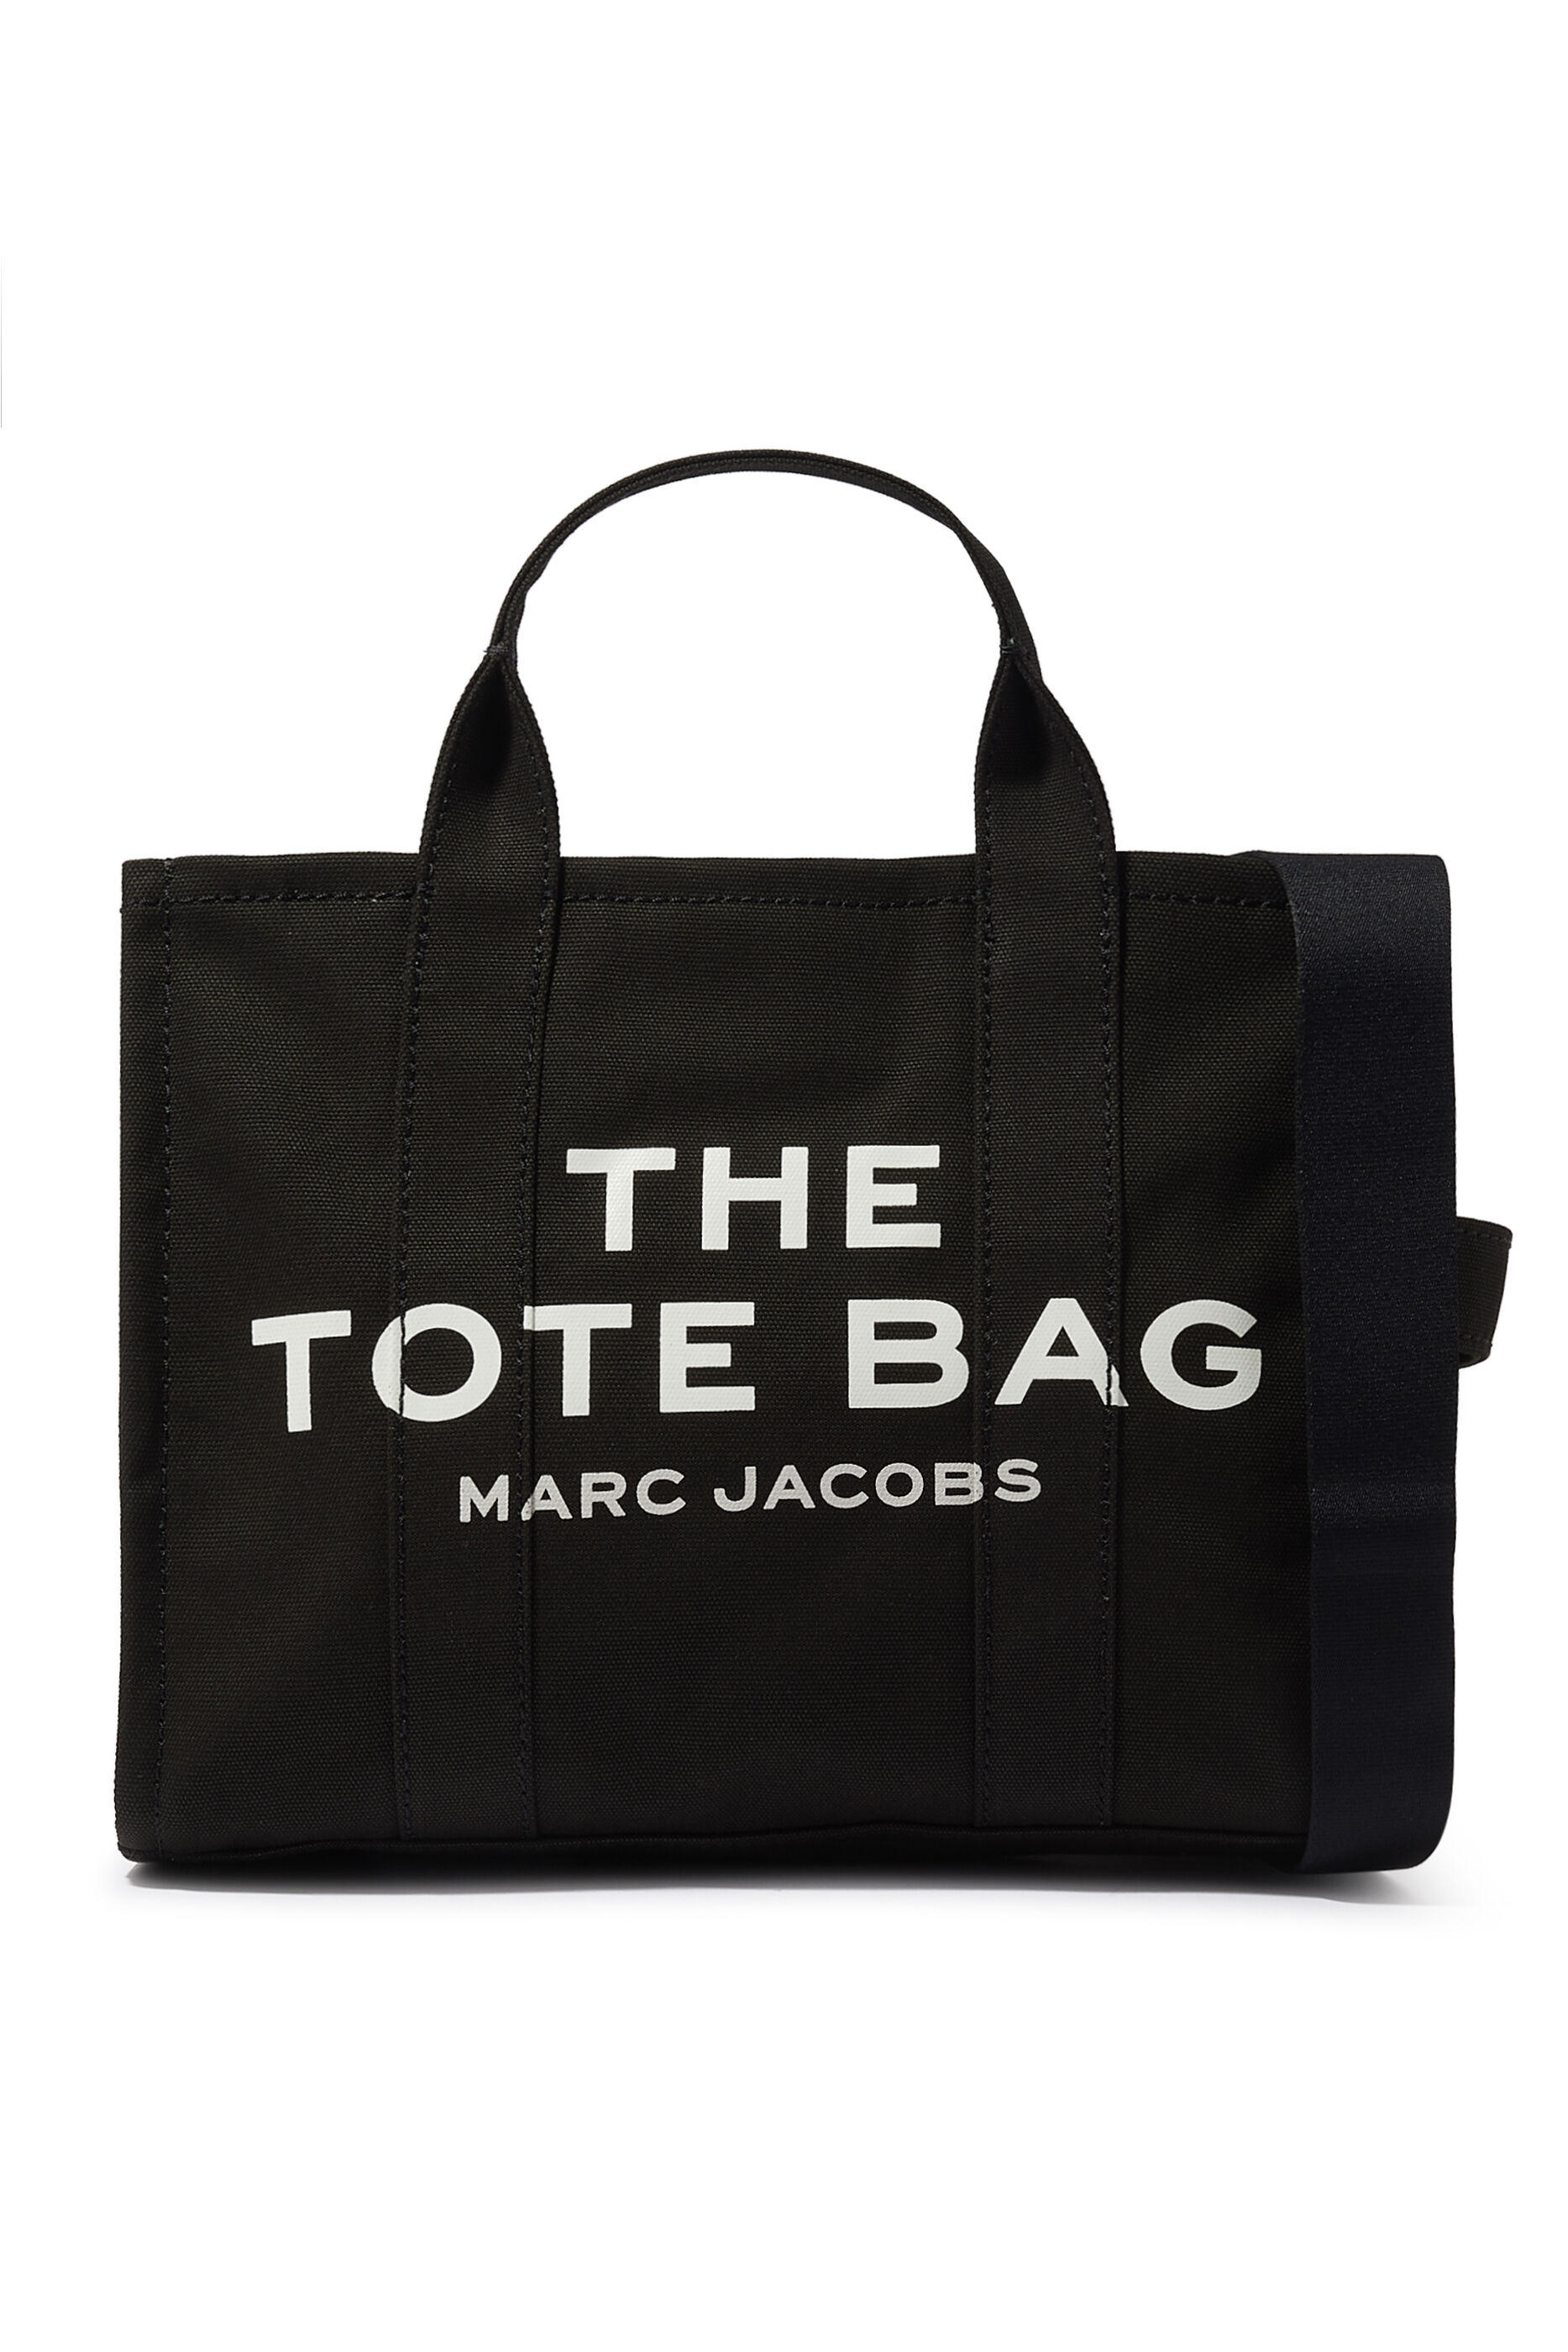 Marc Jacobs Bags  Accessories  MyBag